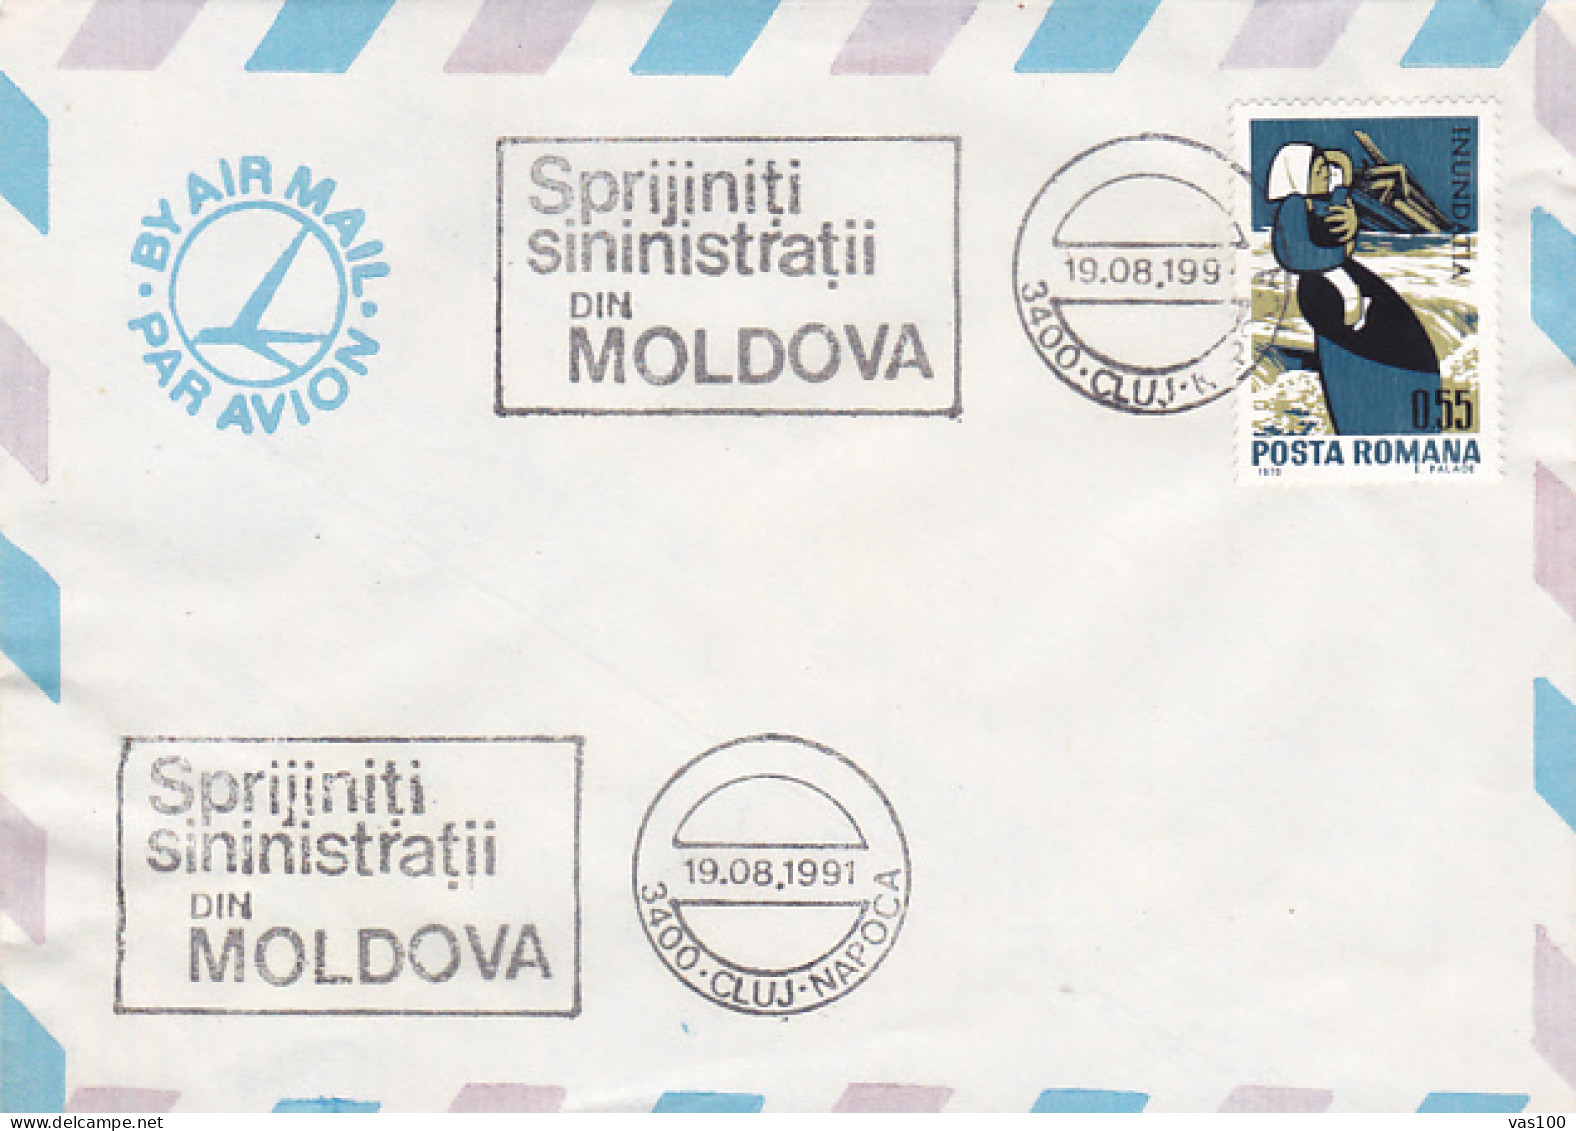 HELS FLOOD VICTIMS CAMPAIGN, SPECIAL POSTMARKS AND STAMP ON COVER, 1991, ROMANIA - Briefe U. Dokumente